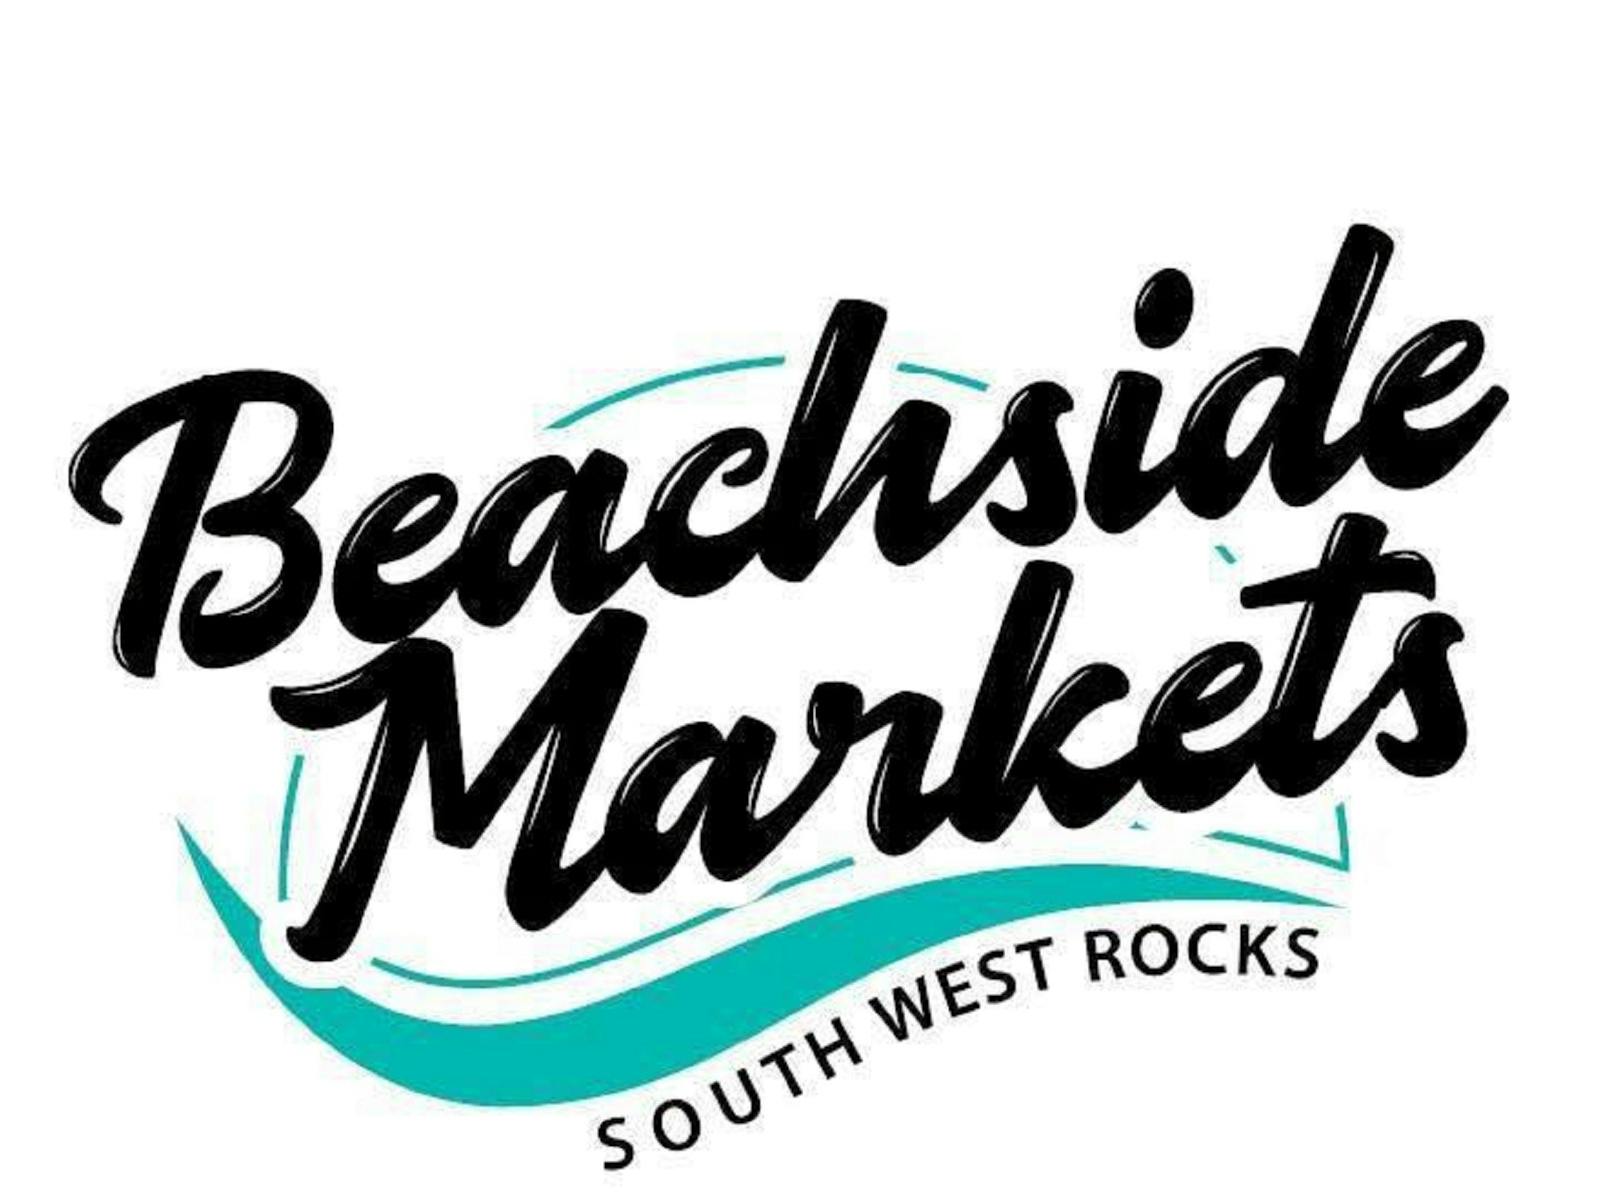 Image for Beachside Markets South West Rocks